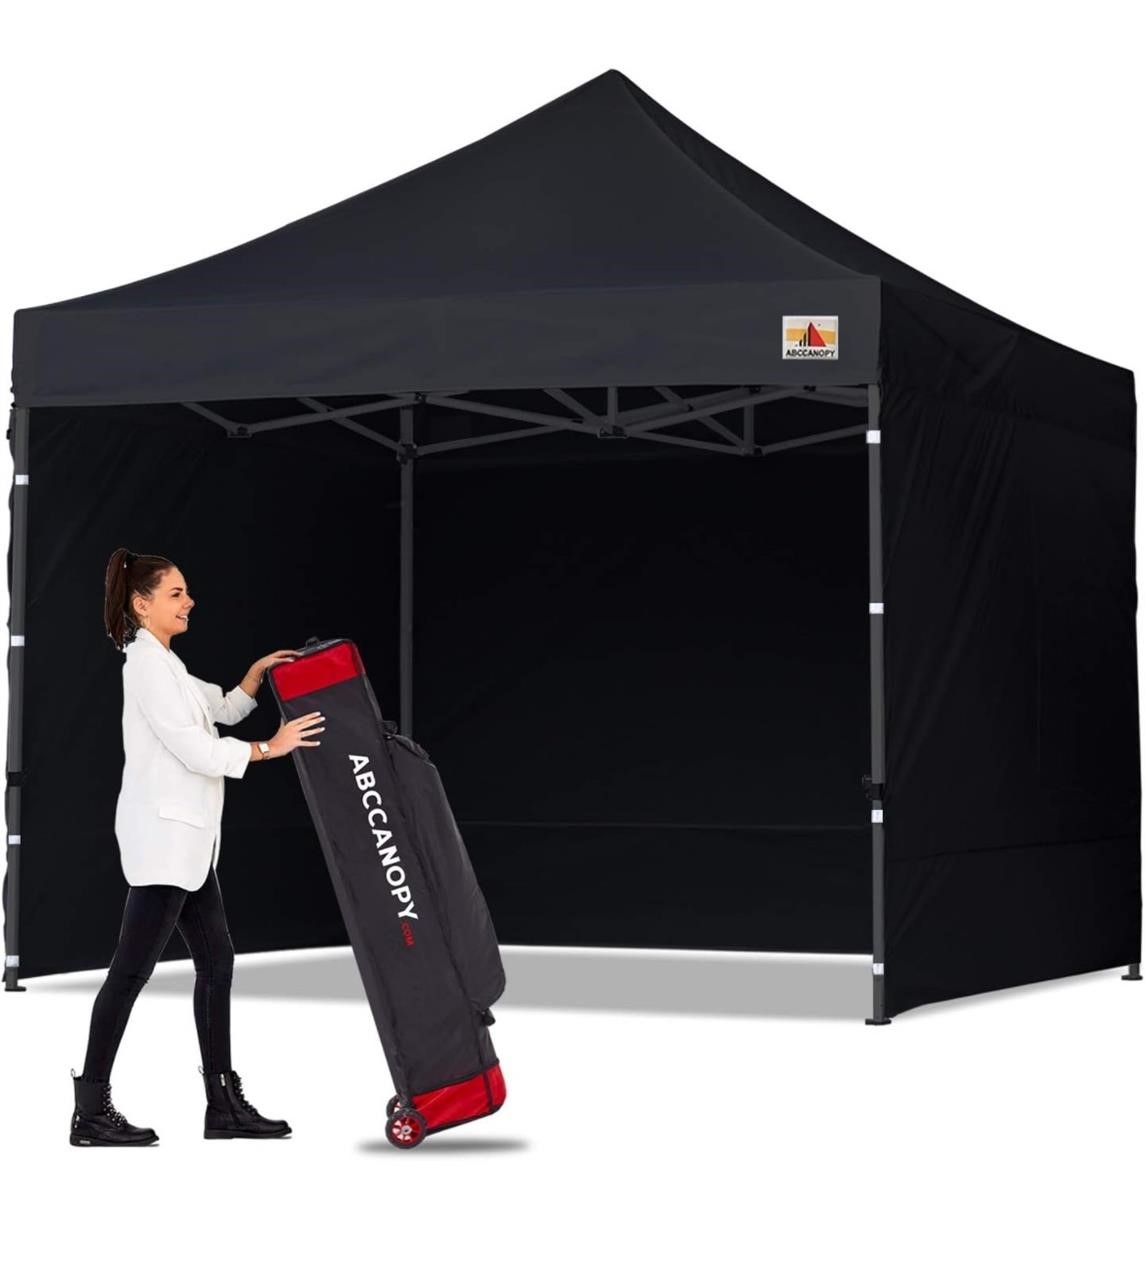 NEW $420 Pop up Canopy Tent 10x10’